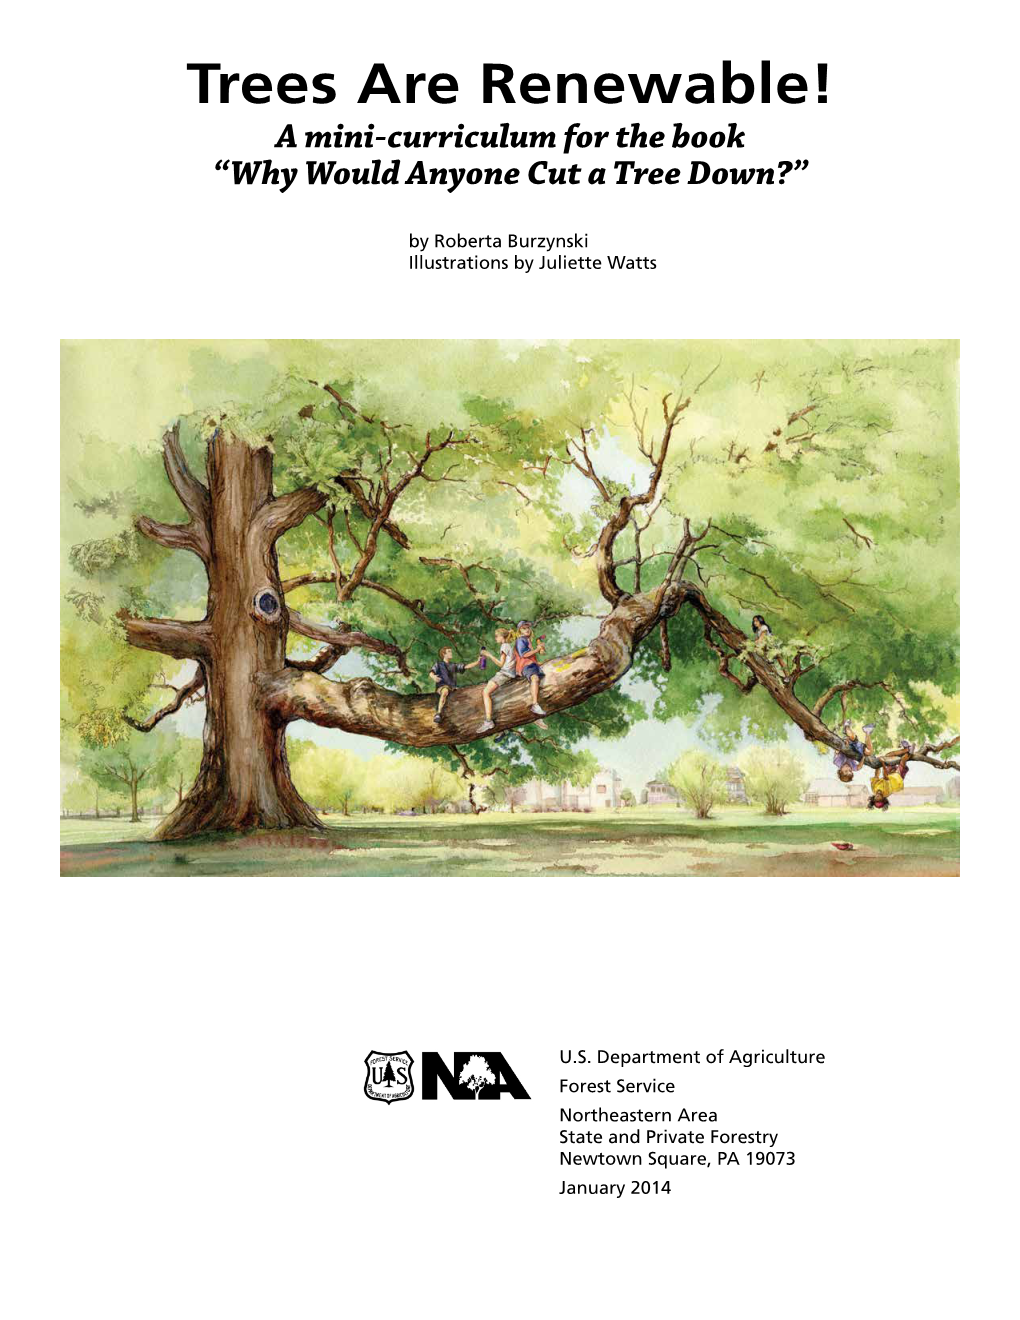 Trees Are Renewable! a Mini-Curriculum for the Book “Why Would Anyone Cut a Tree Down?”